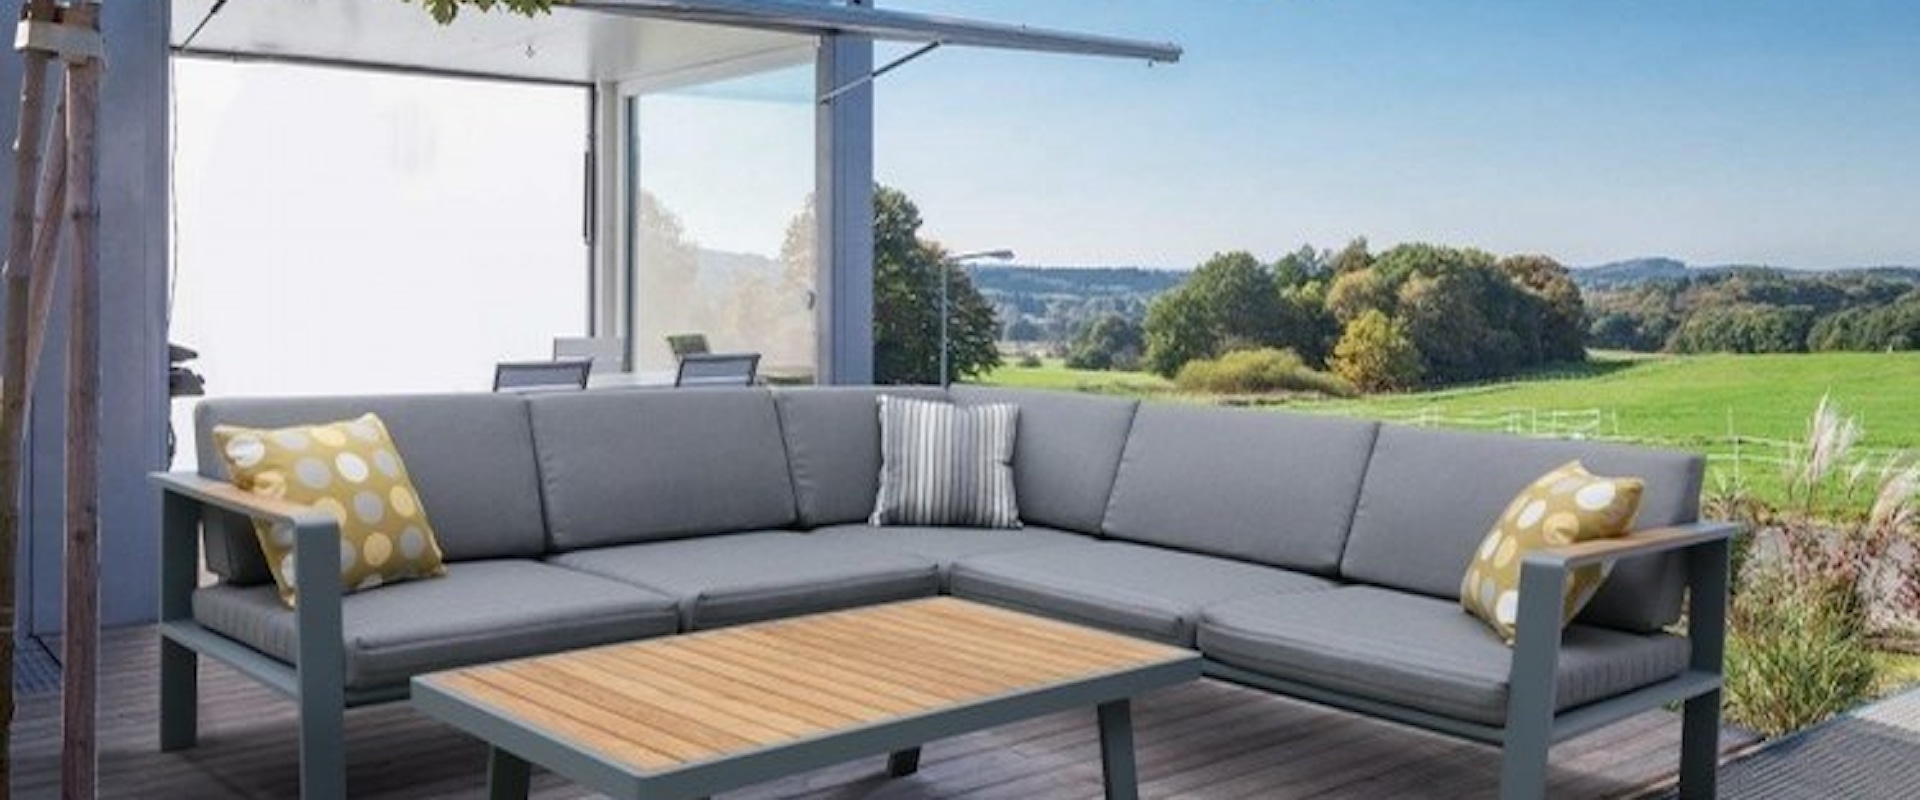 Outdoor Patio Sectional Set in Gray Finish with Gray Cushions and Teak Wood